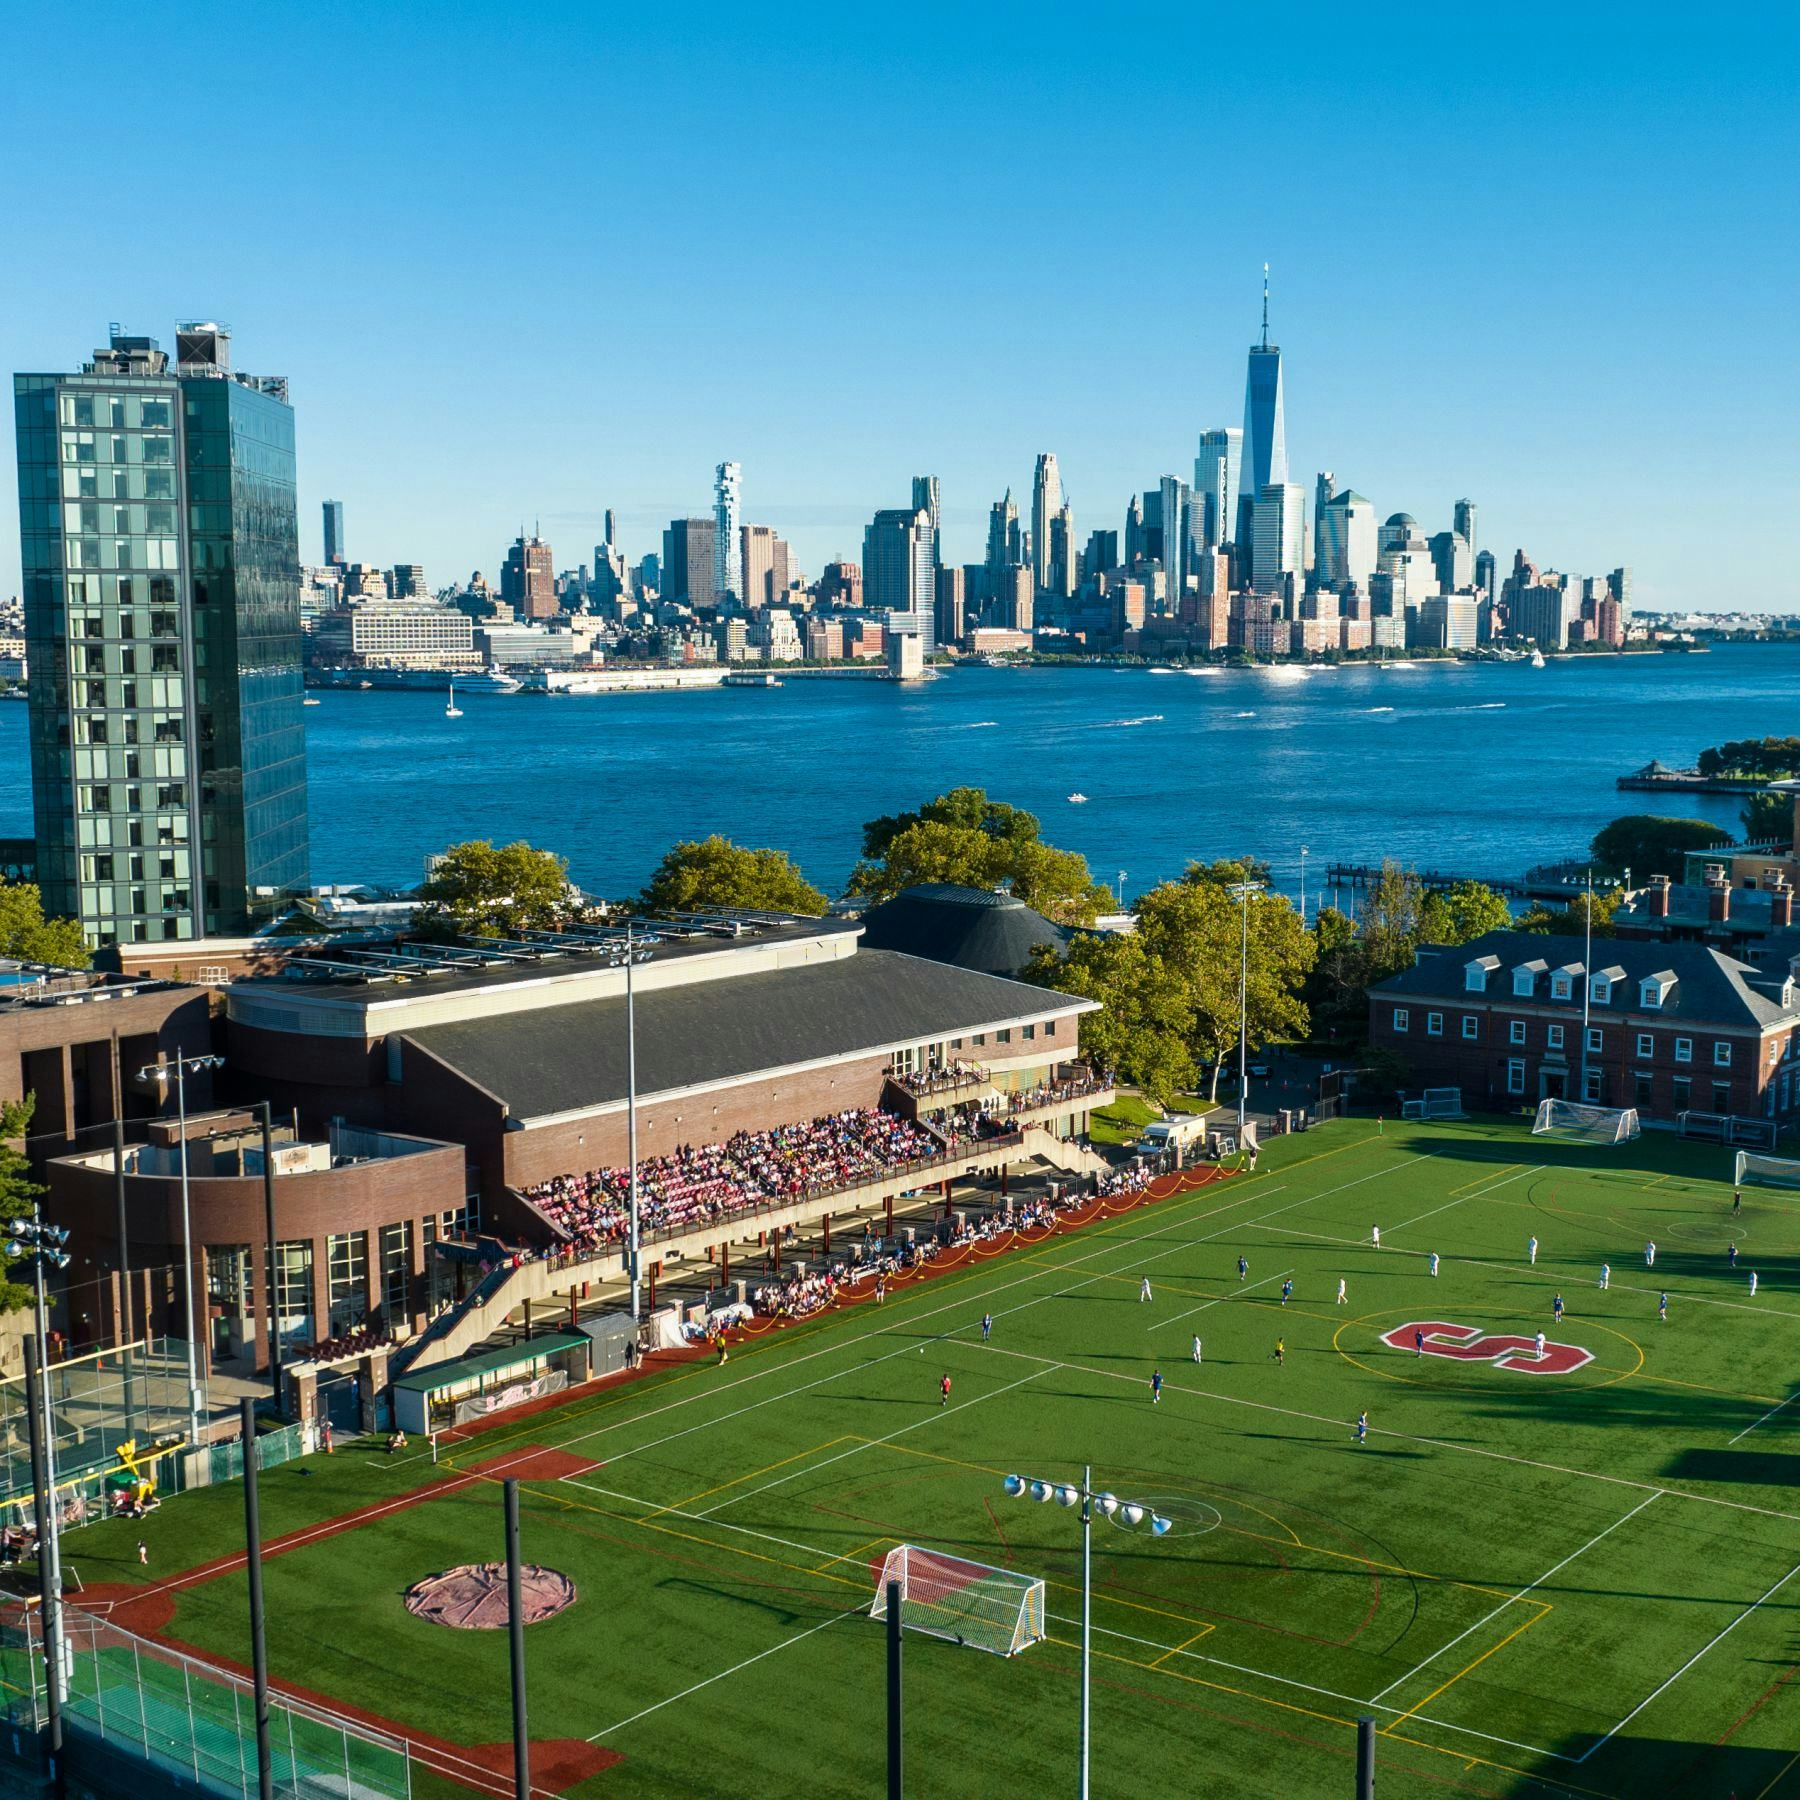 View of Stevens campus from above athletics field, with New York skyline in background